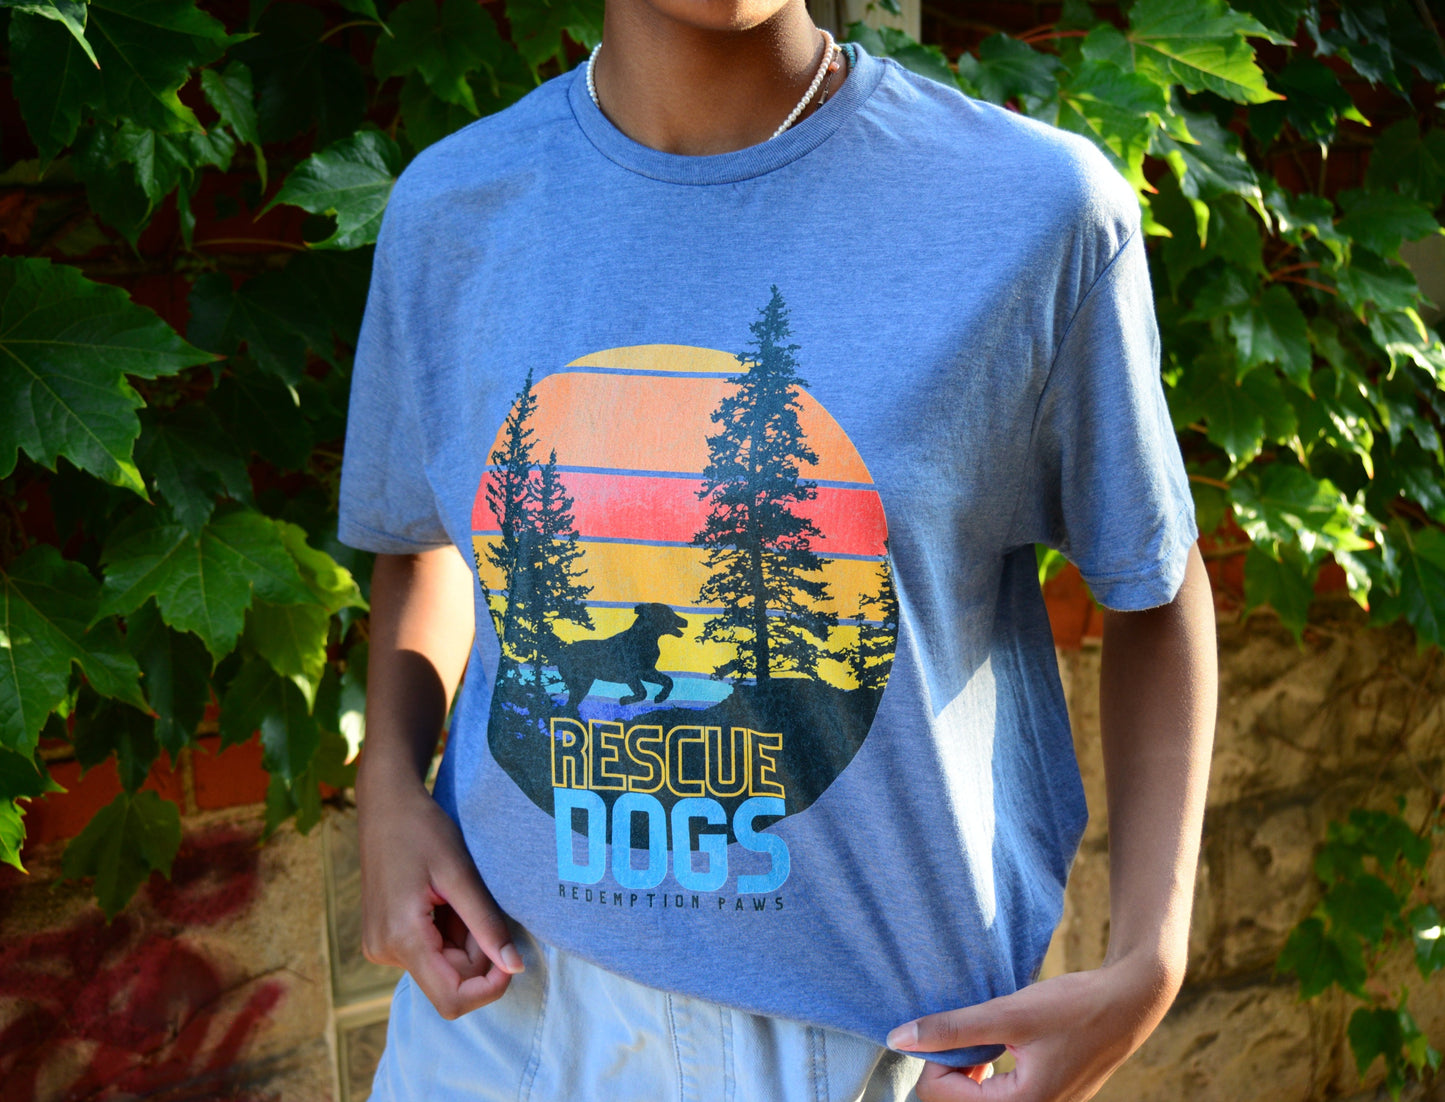 Sunset Rescue Dogs T-Shirt